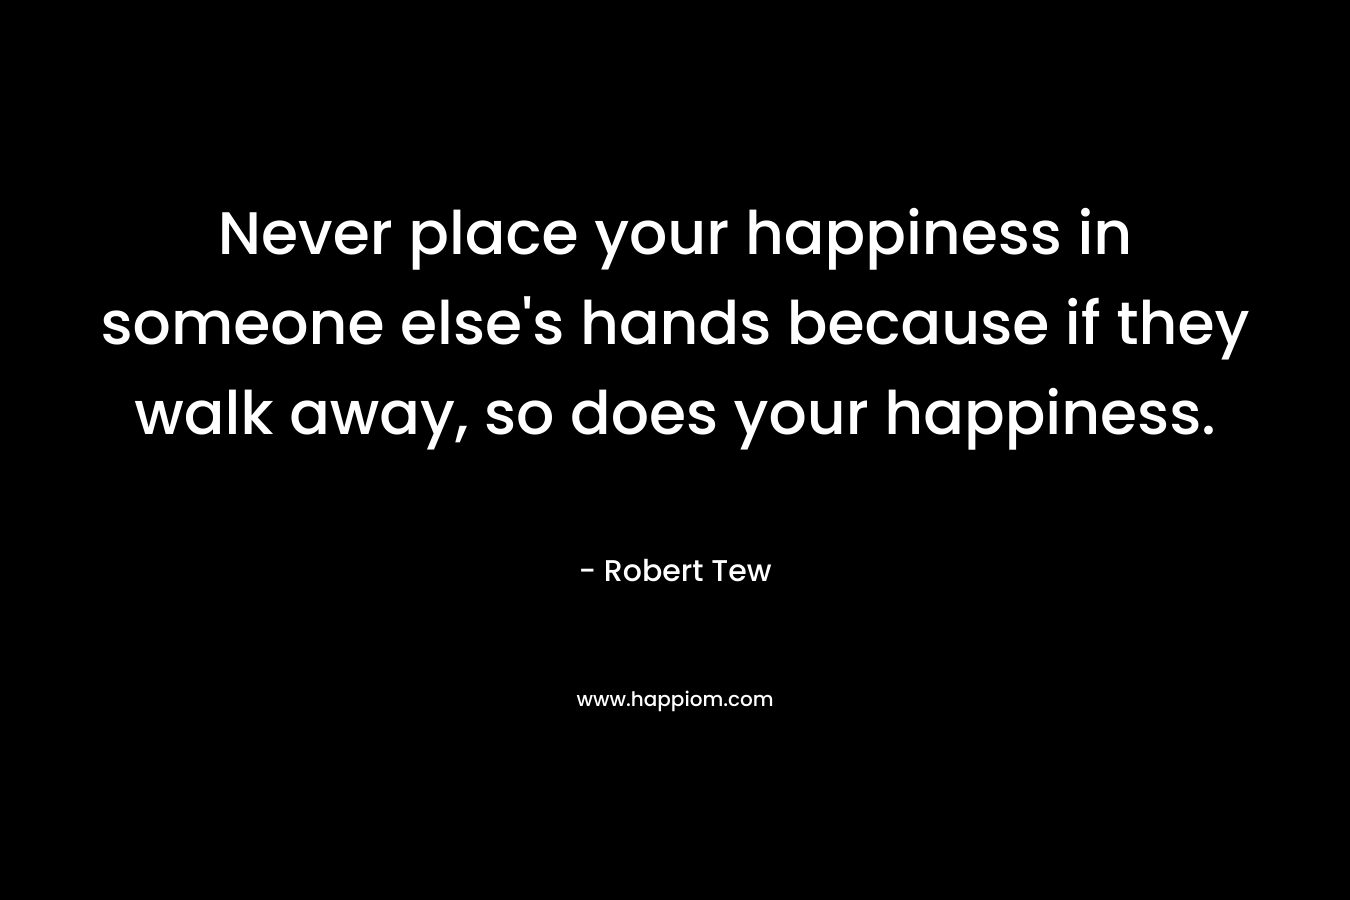 Never place your happiness in someone else's hands because if they walk away, so does your happiness.